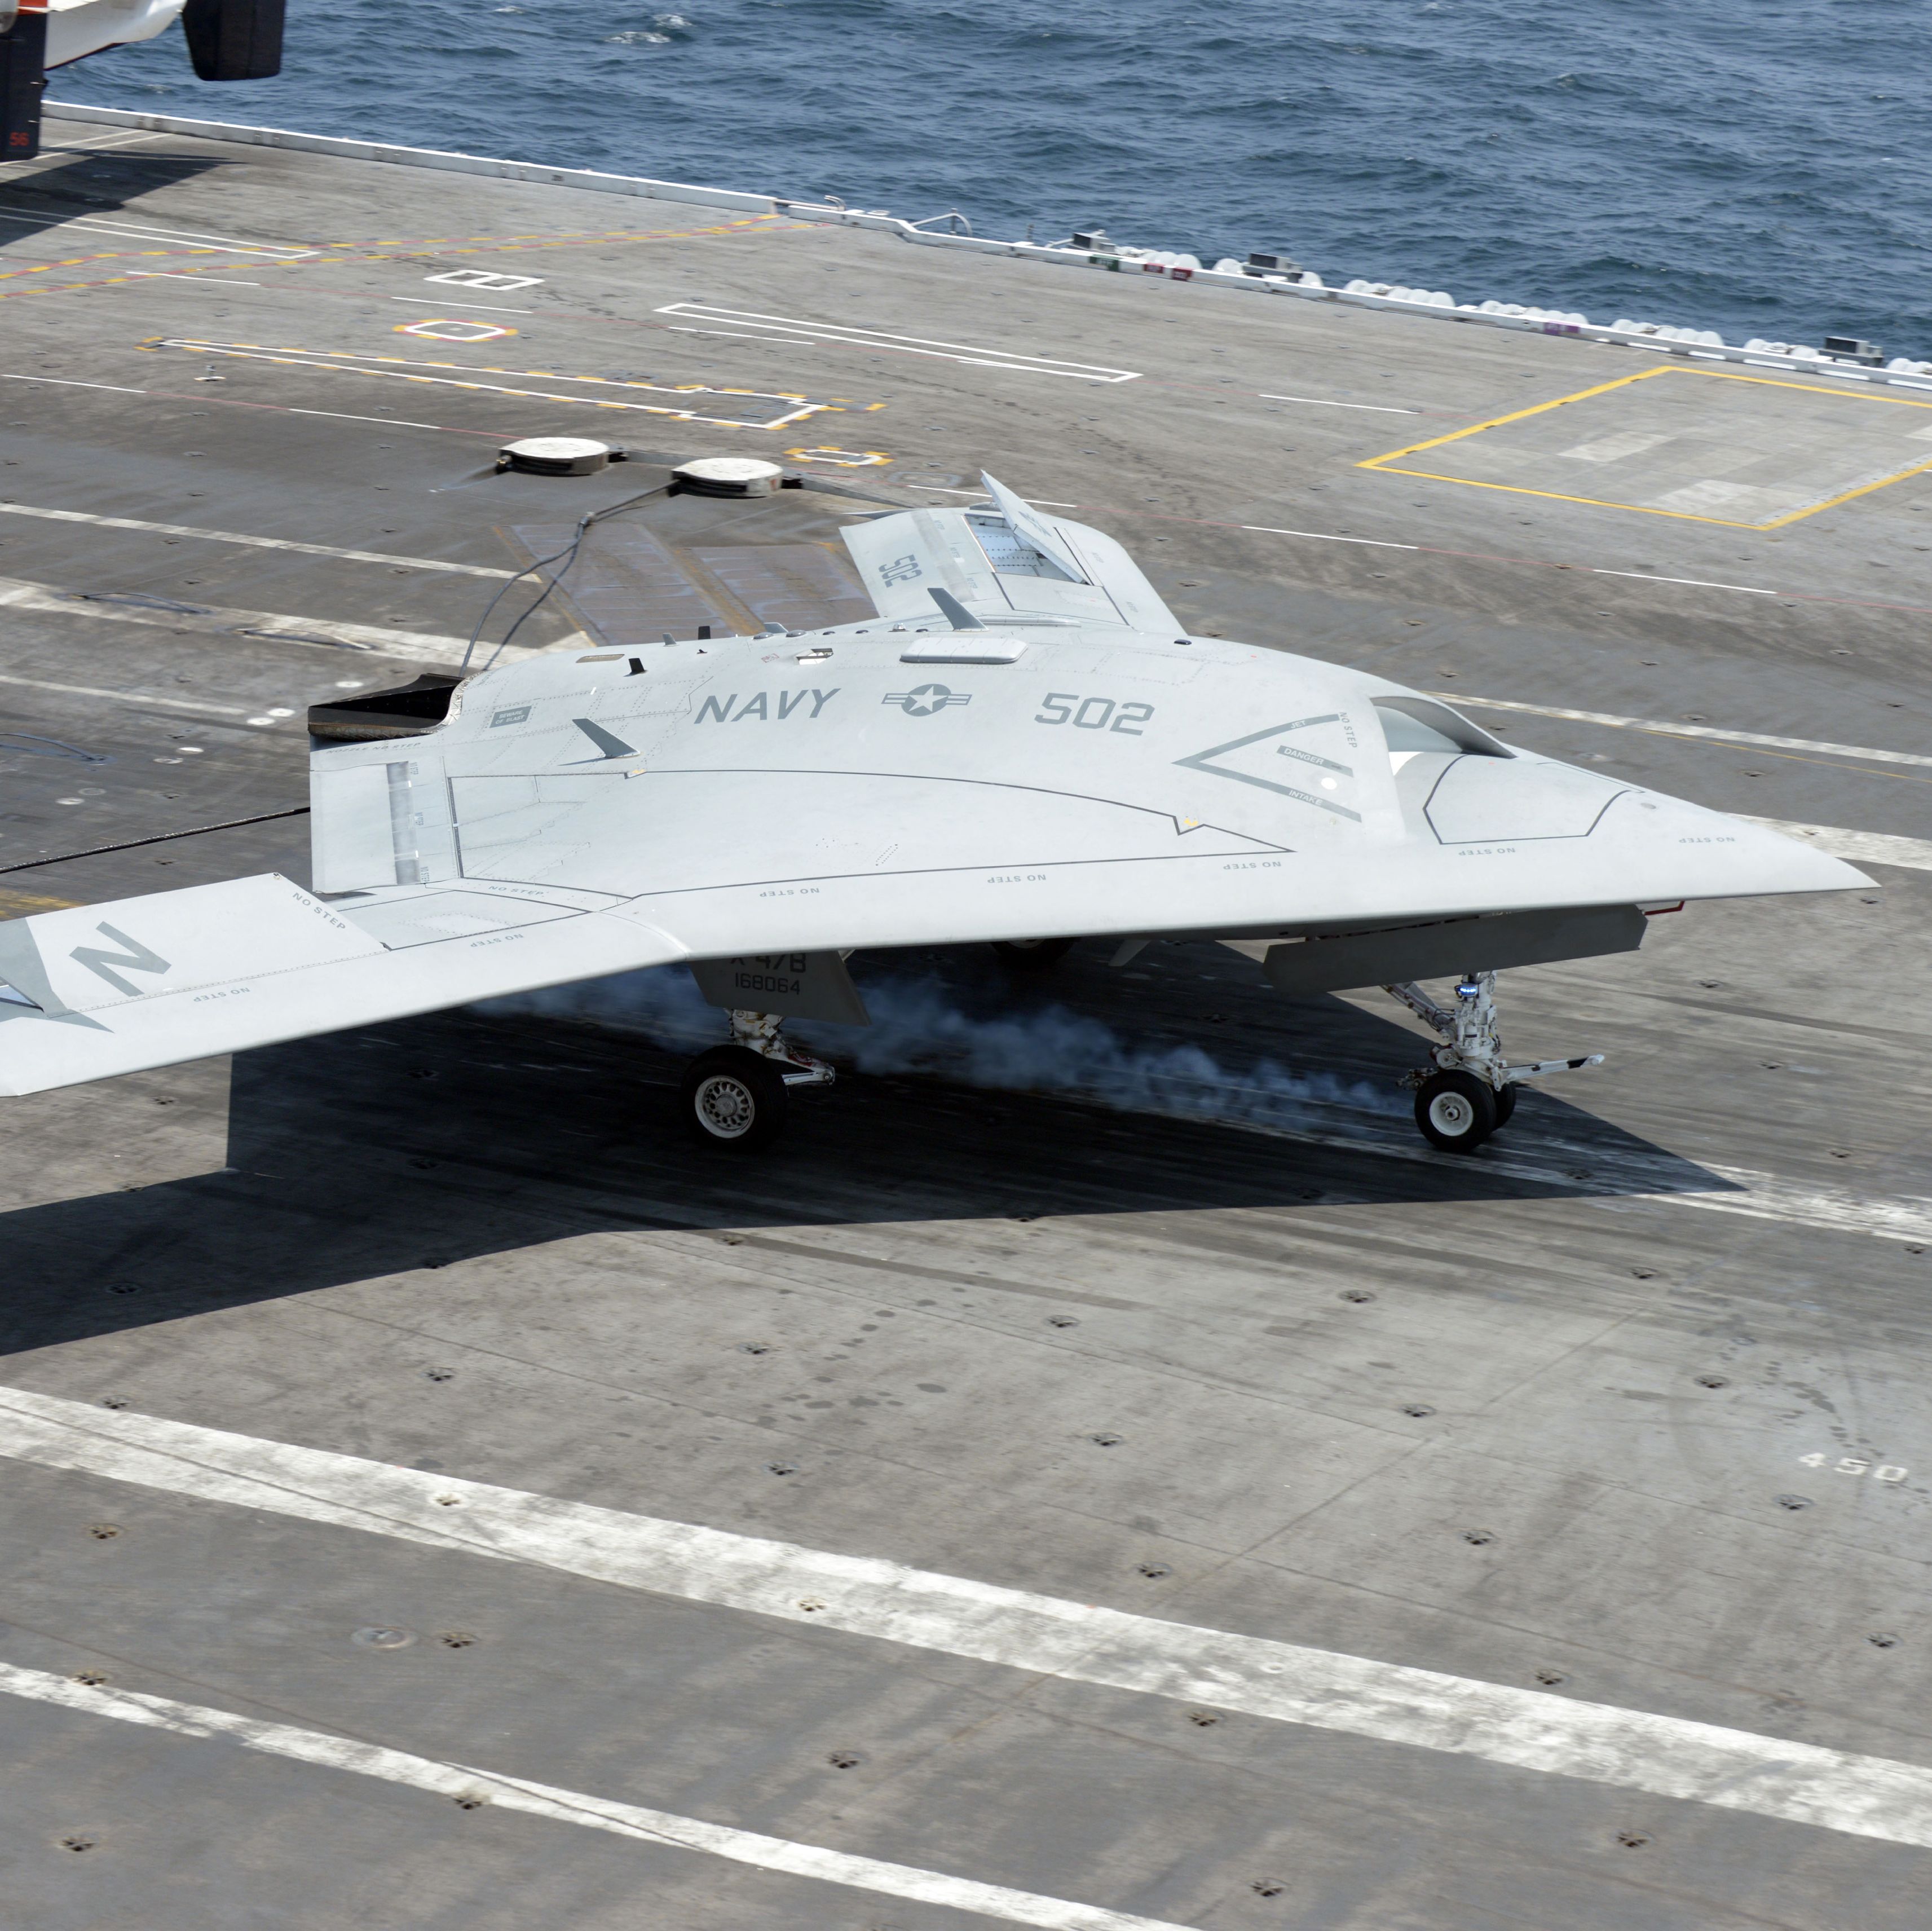 The U.S. Navy Wants Autonomous Fighter Jets, But First It Needs to Trust AI